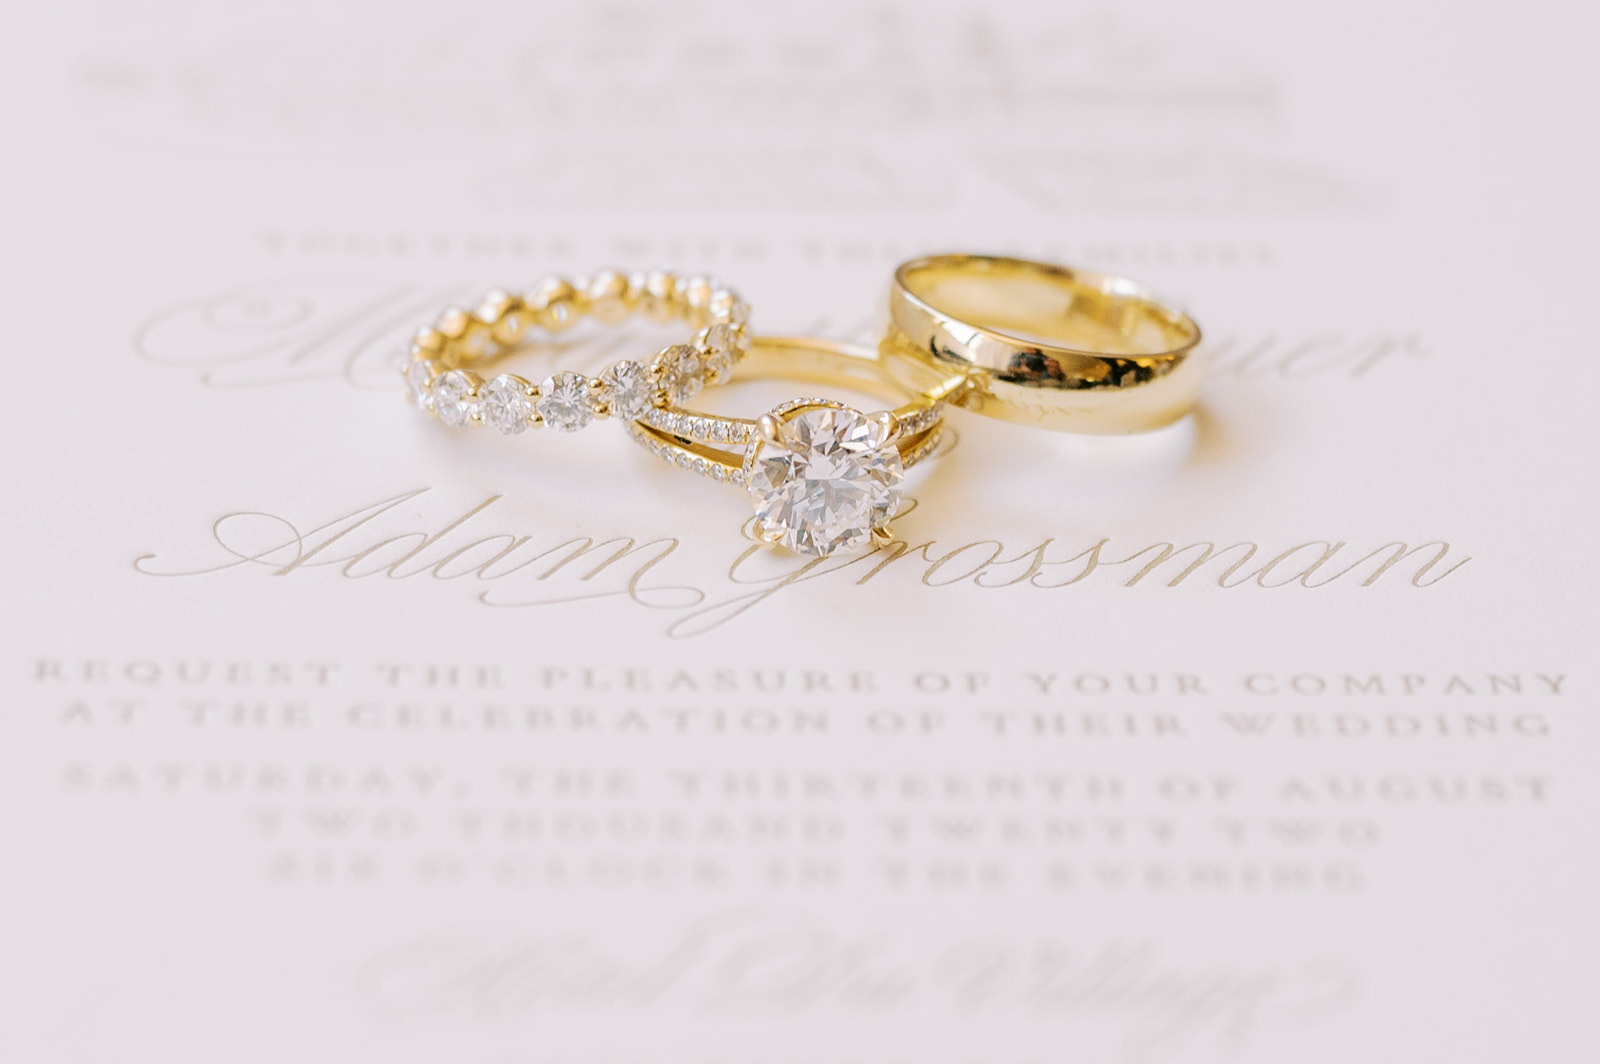 engagement ring with wedding bands on invitation 